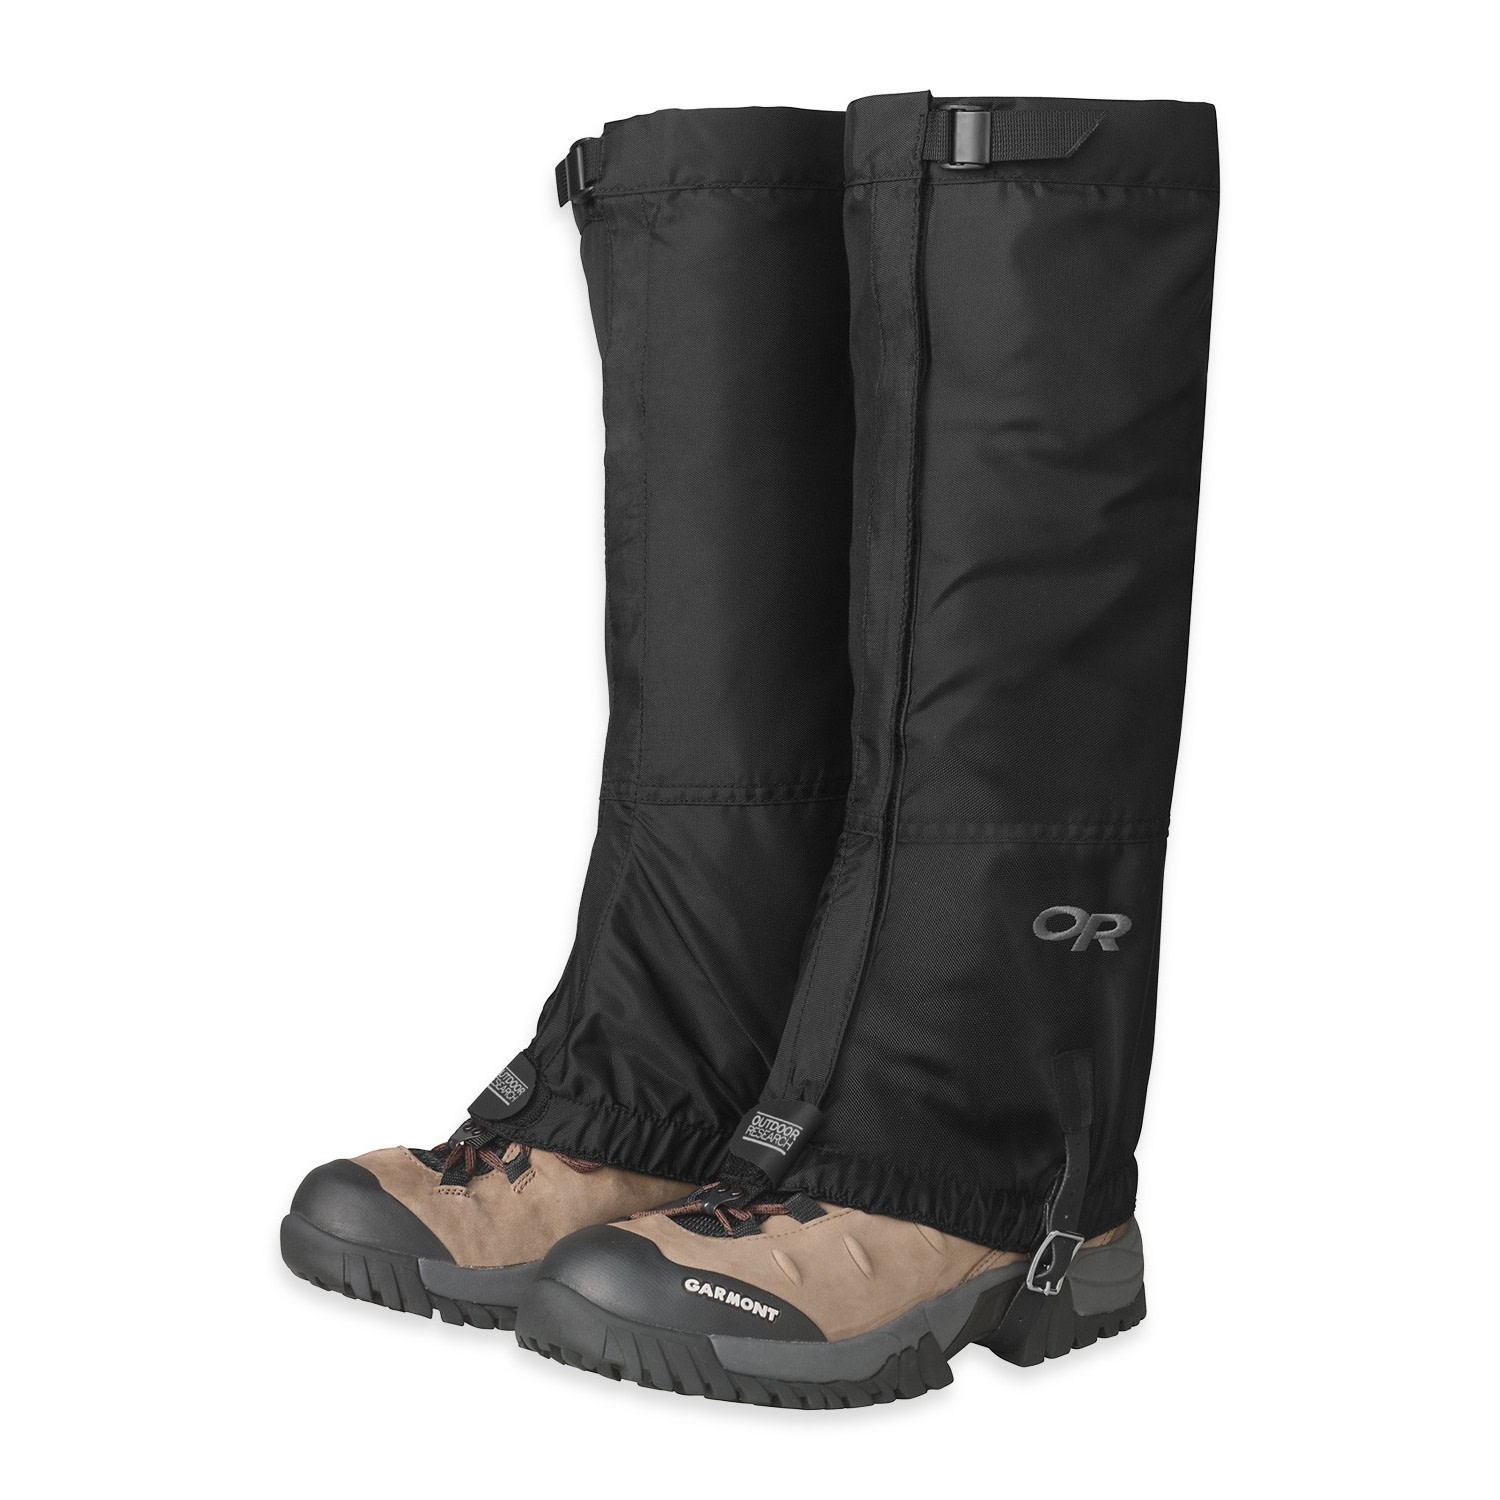 Outdoor Research Men’s Rocky Mountain High Gaiters Black